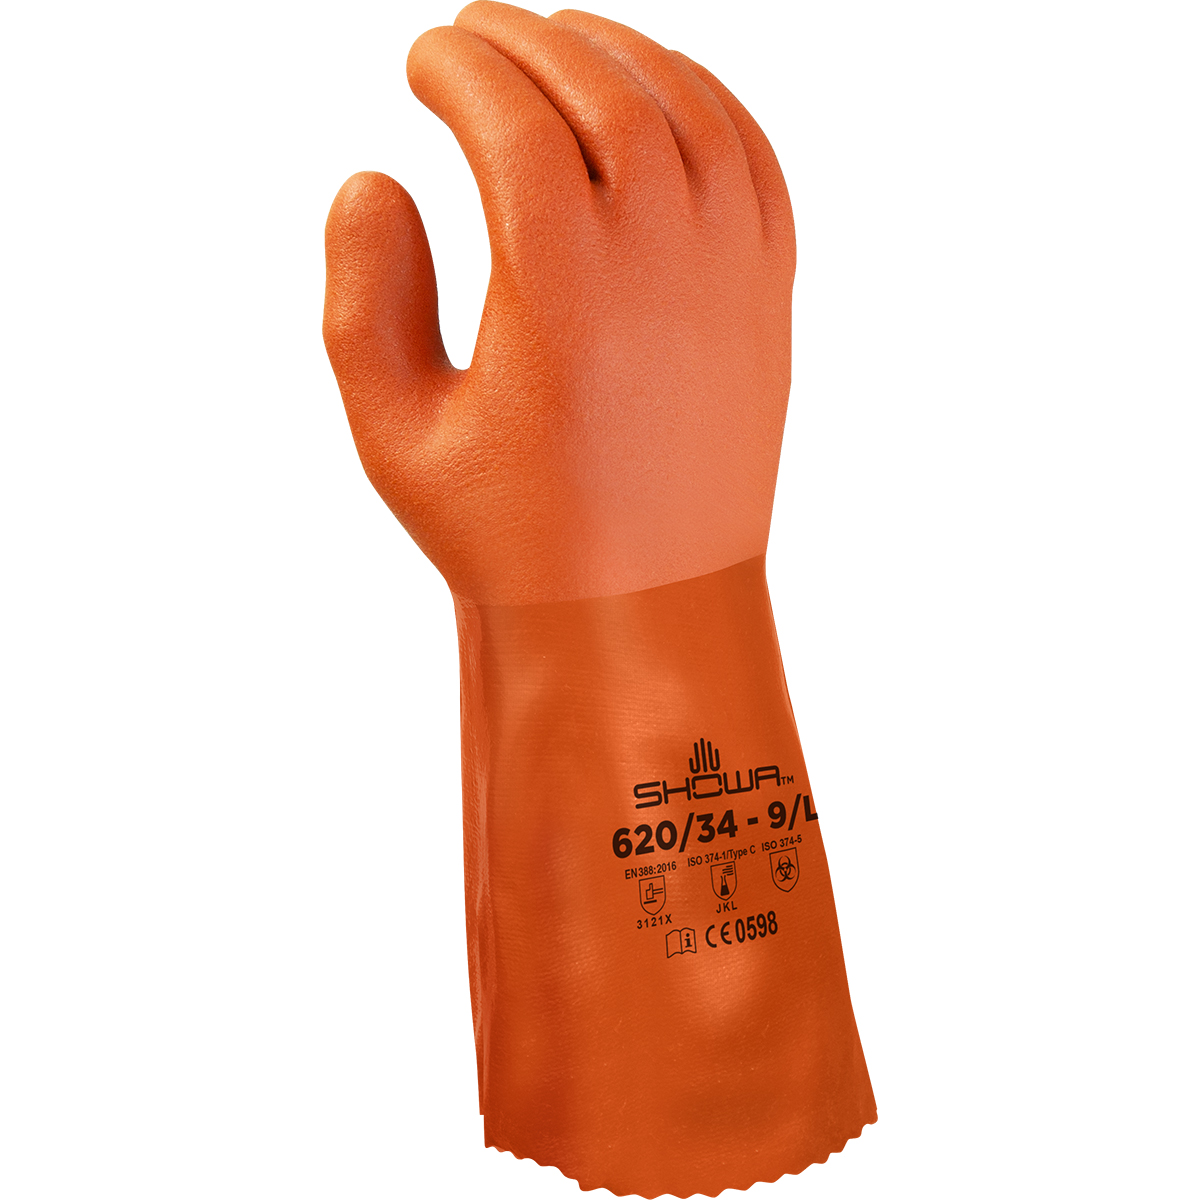 Chemical resistant PVC fully coated double dipped, seamless knitted liner, 12" length, orange, rough finish, medium